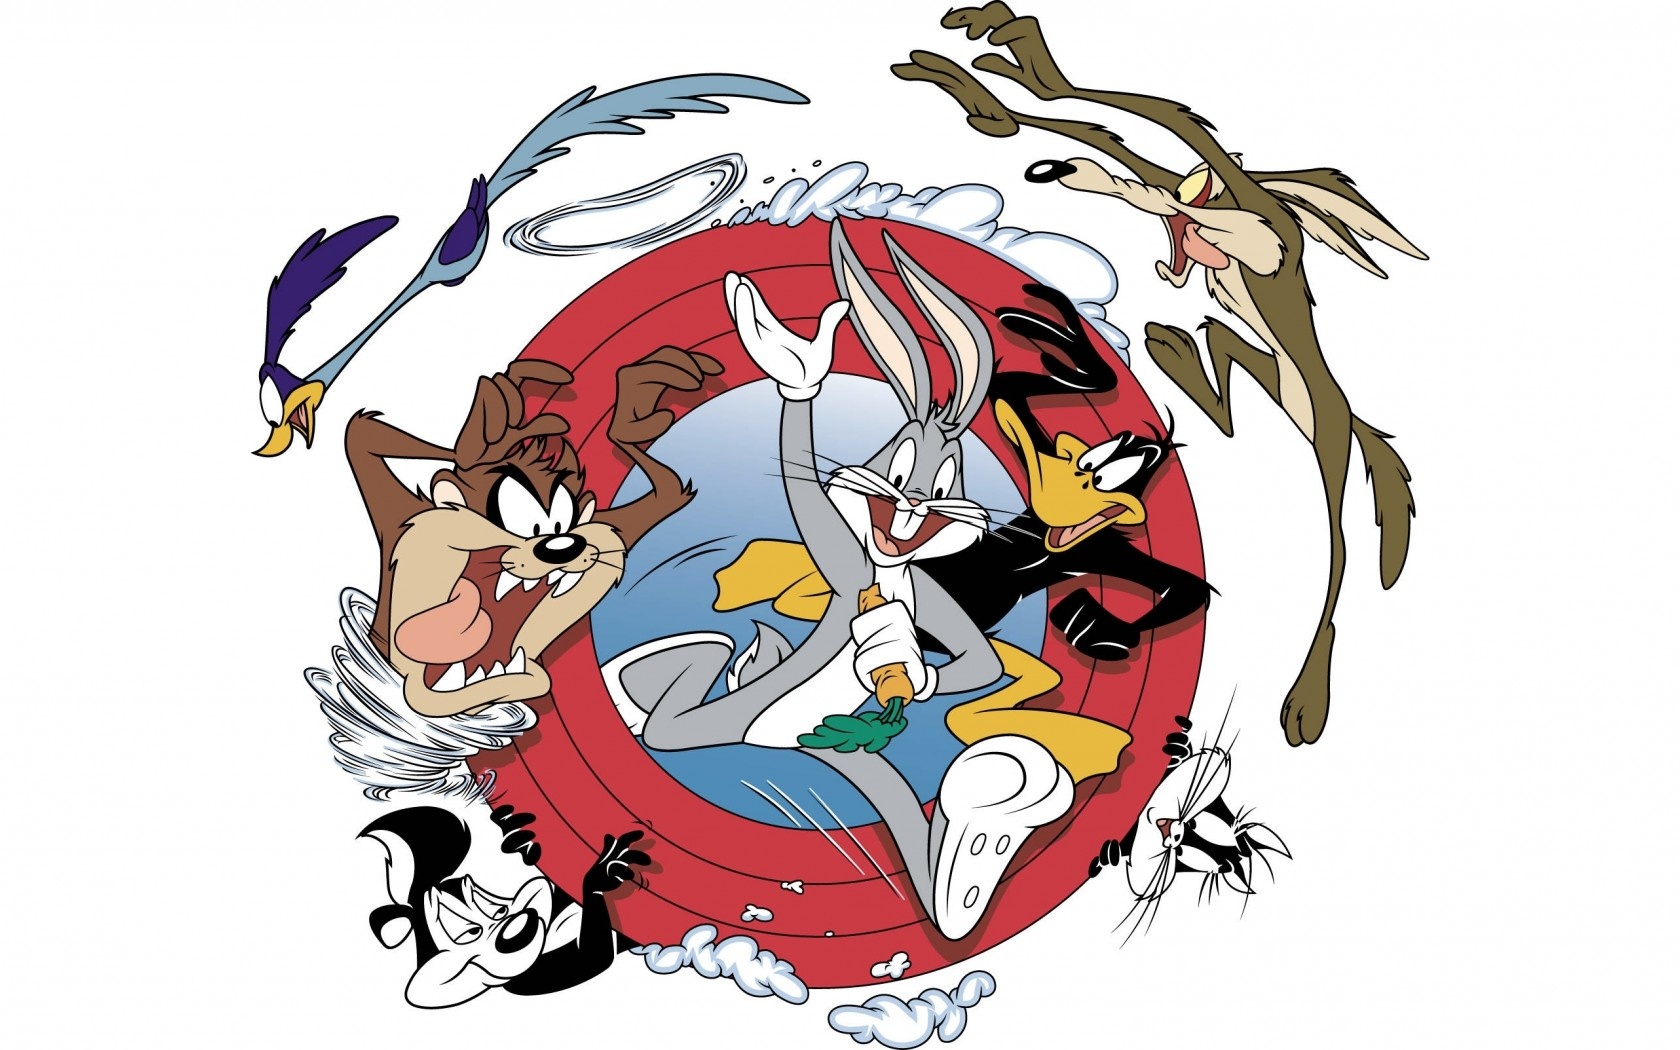 Funny Looney Tunes Character Wallpapers   1680x1050   395220 1680x1050